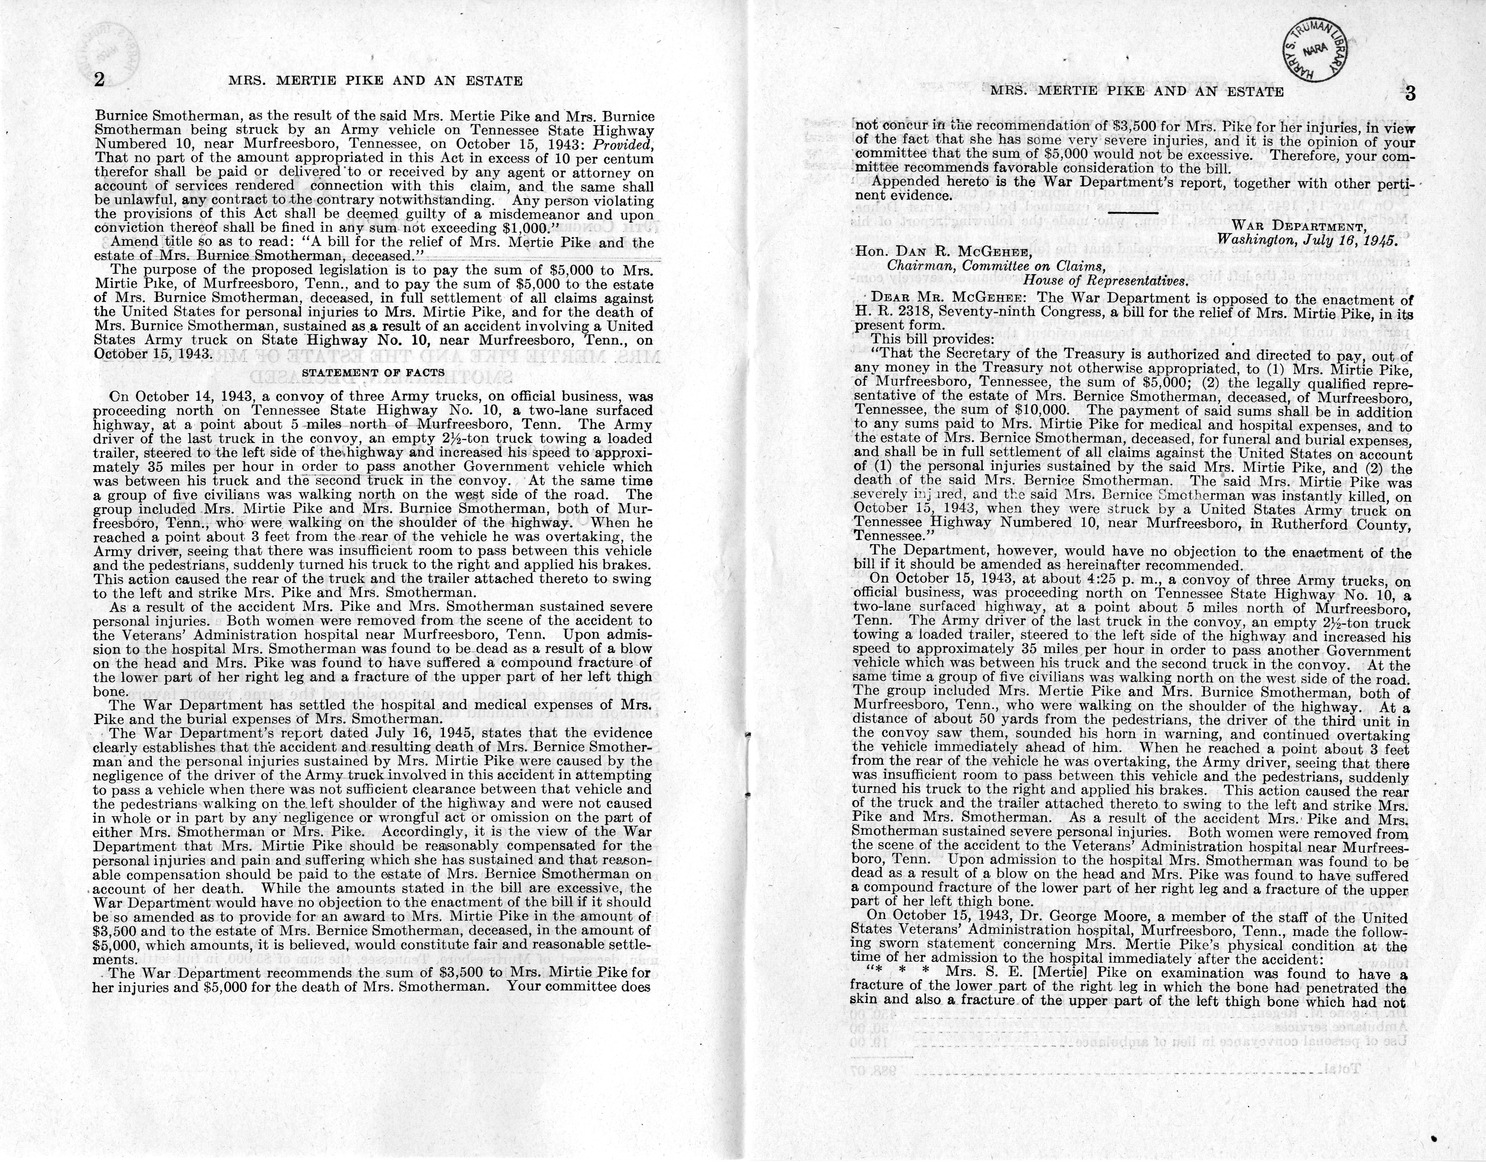 Memorandum from Frederick J. Bailey to M. C. Latta, H. R. 2318, For the Relief of Mrs. Mertie Pike and the Estate of Mrs. Bernice Smotherman, Deceased, with Attachments